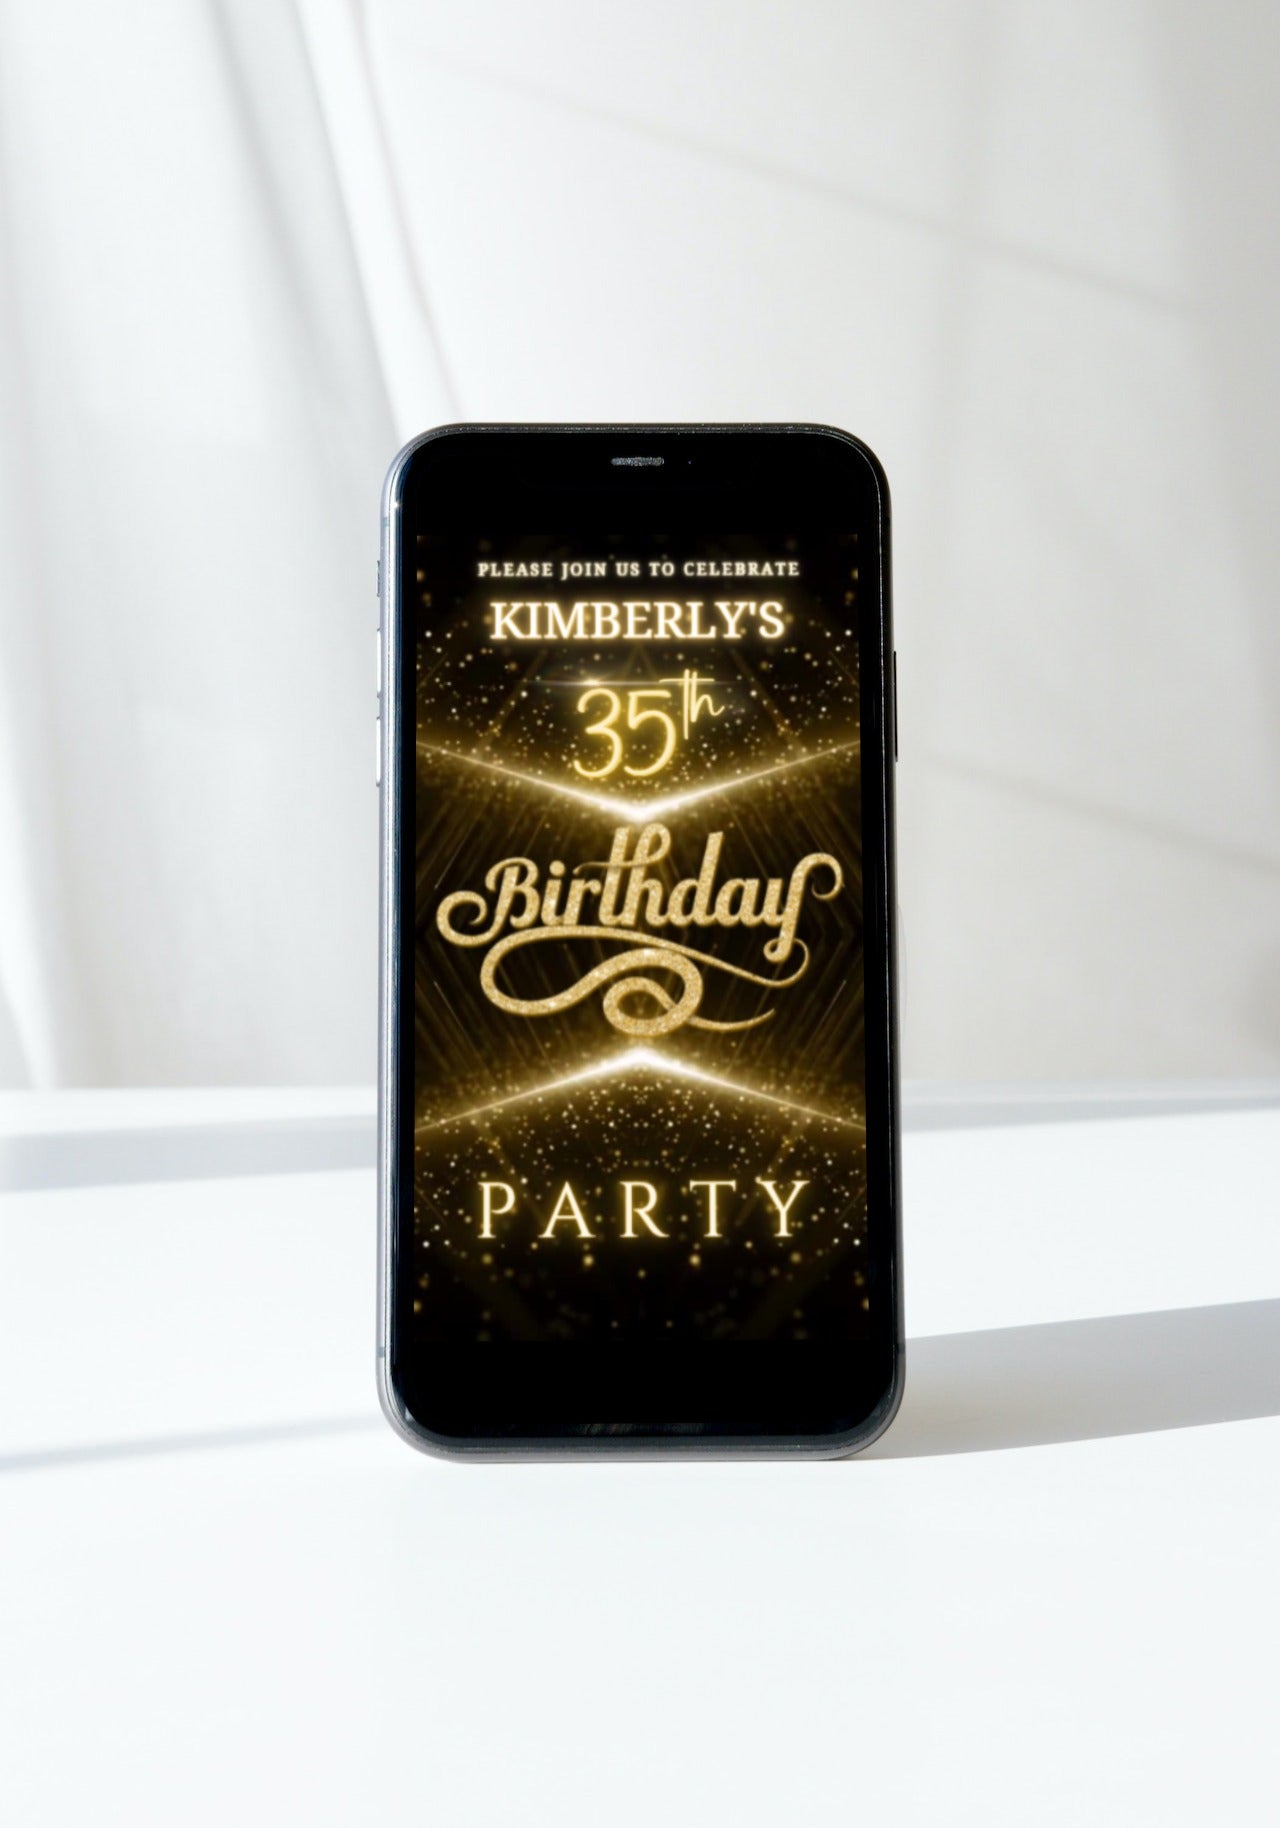 Black Gold Glitter Birthday Video Invitation displayed on a smartphone screen, showcasing customizable text and design elements for any age.